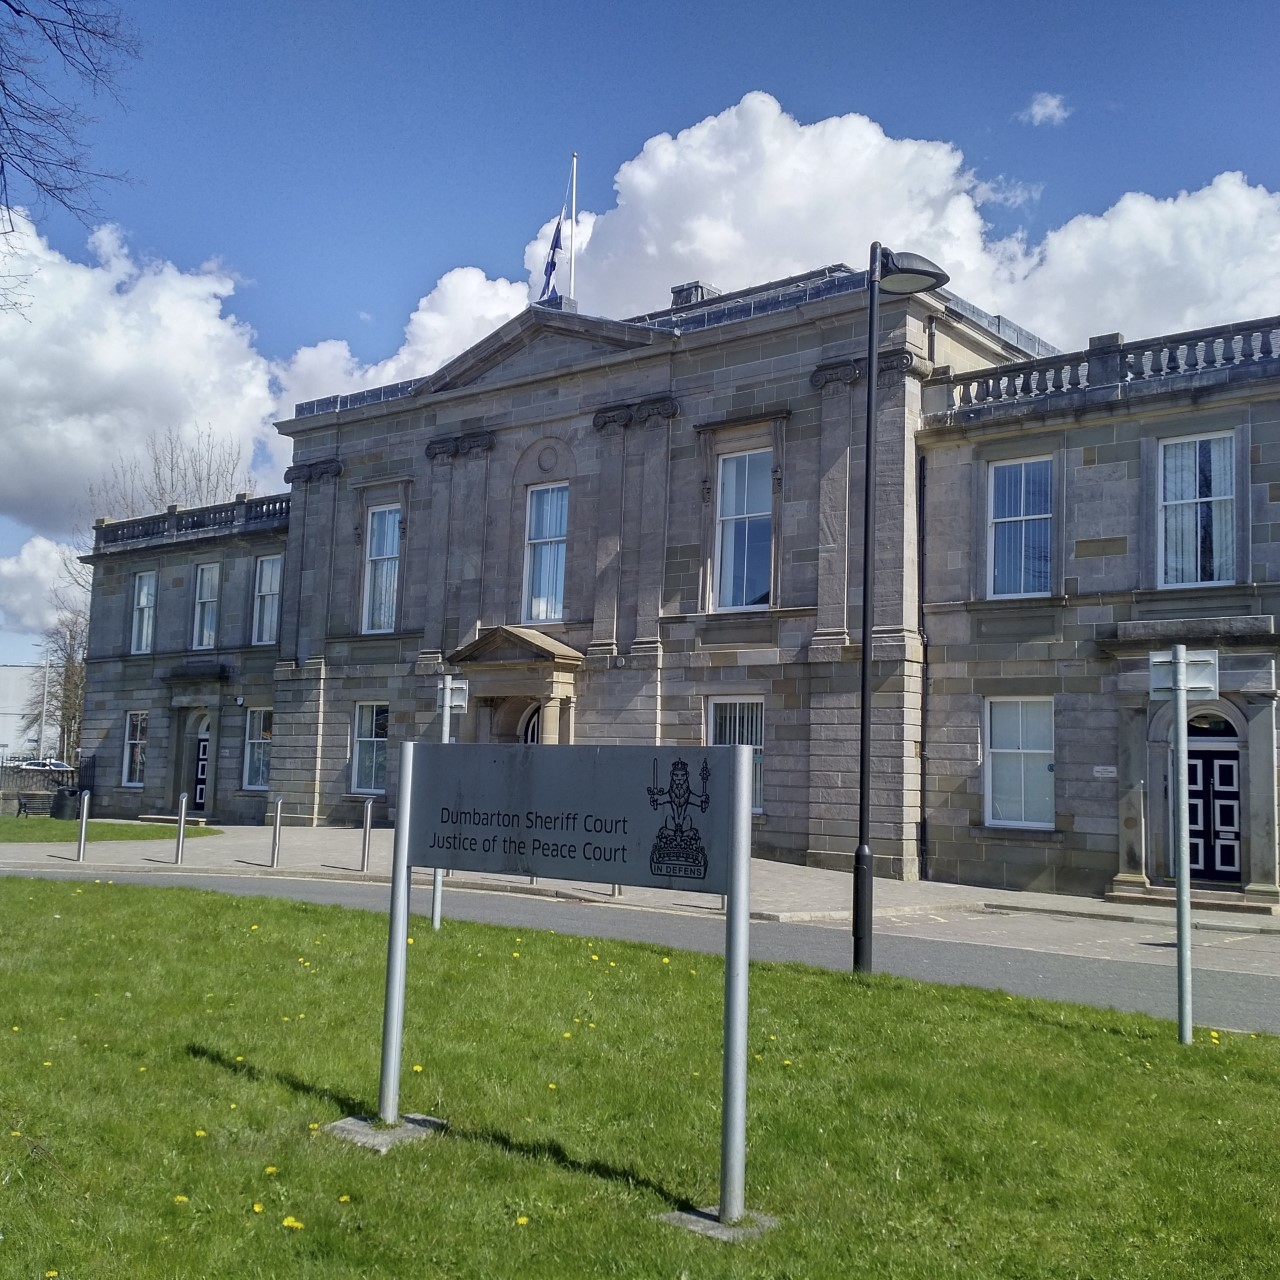 Knightswood man Kosar Mohamed hurled homophobic abuse at police given fine